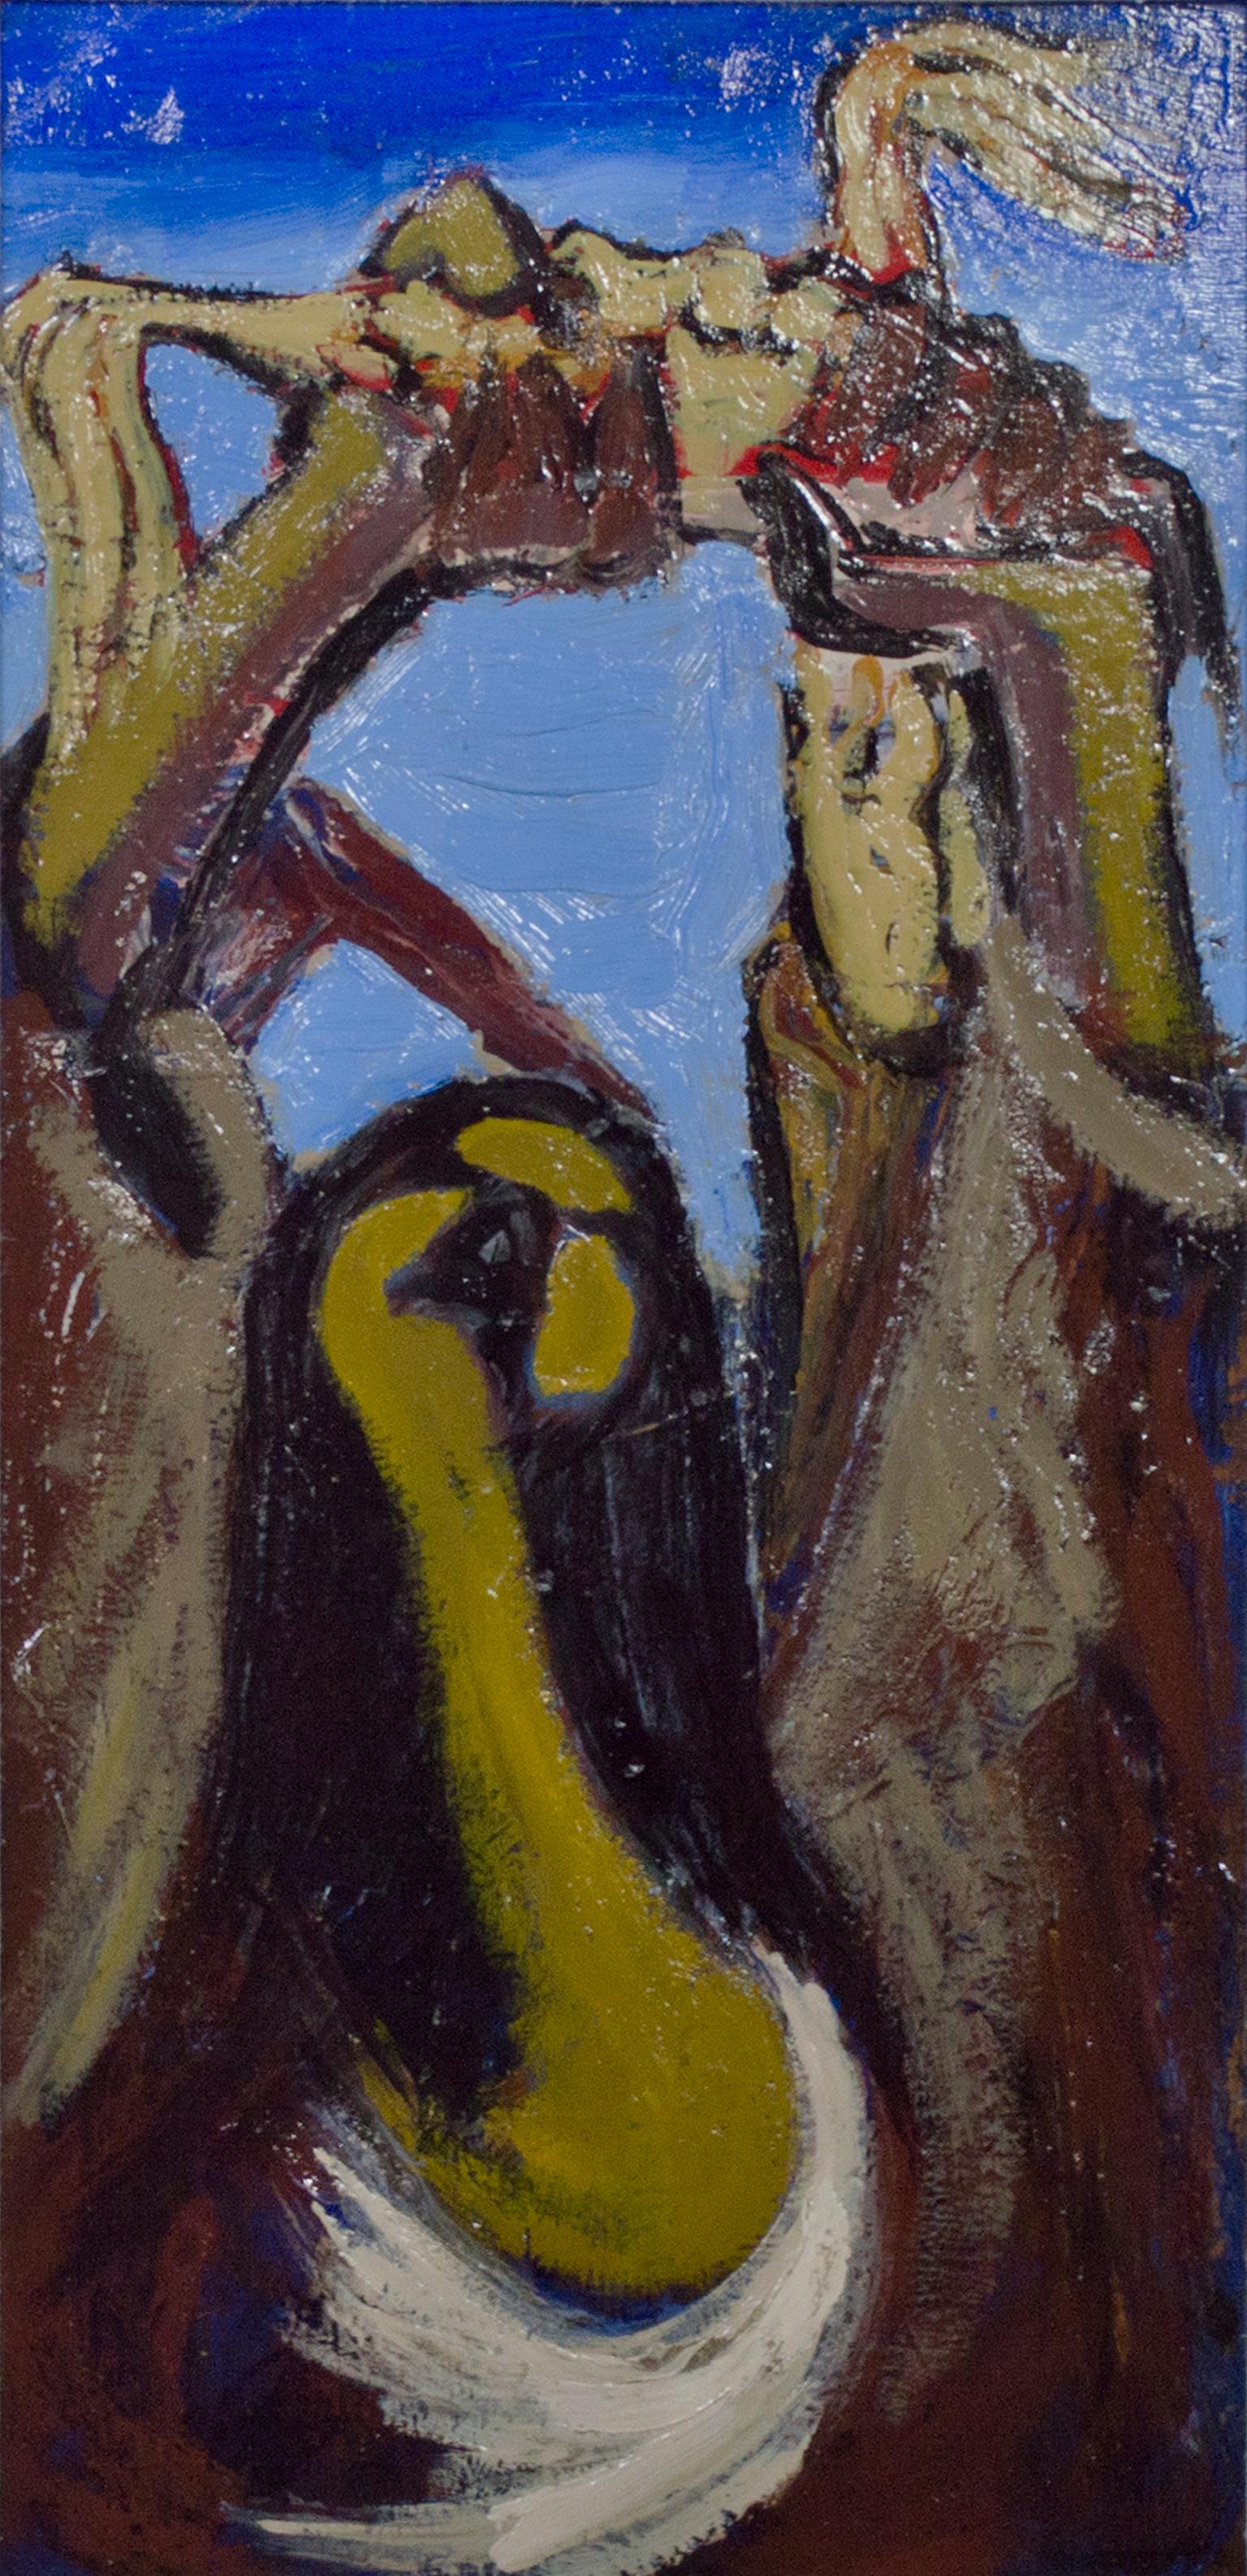 Unknown Abstract Painting - "Maize, " Original Oil on Panel by School of/Student of David Alfaro Siqueiros